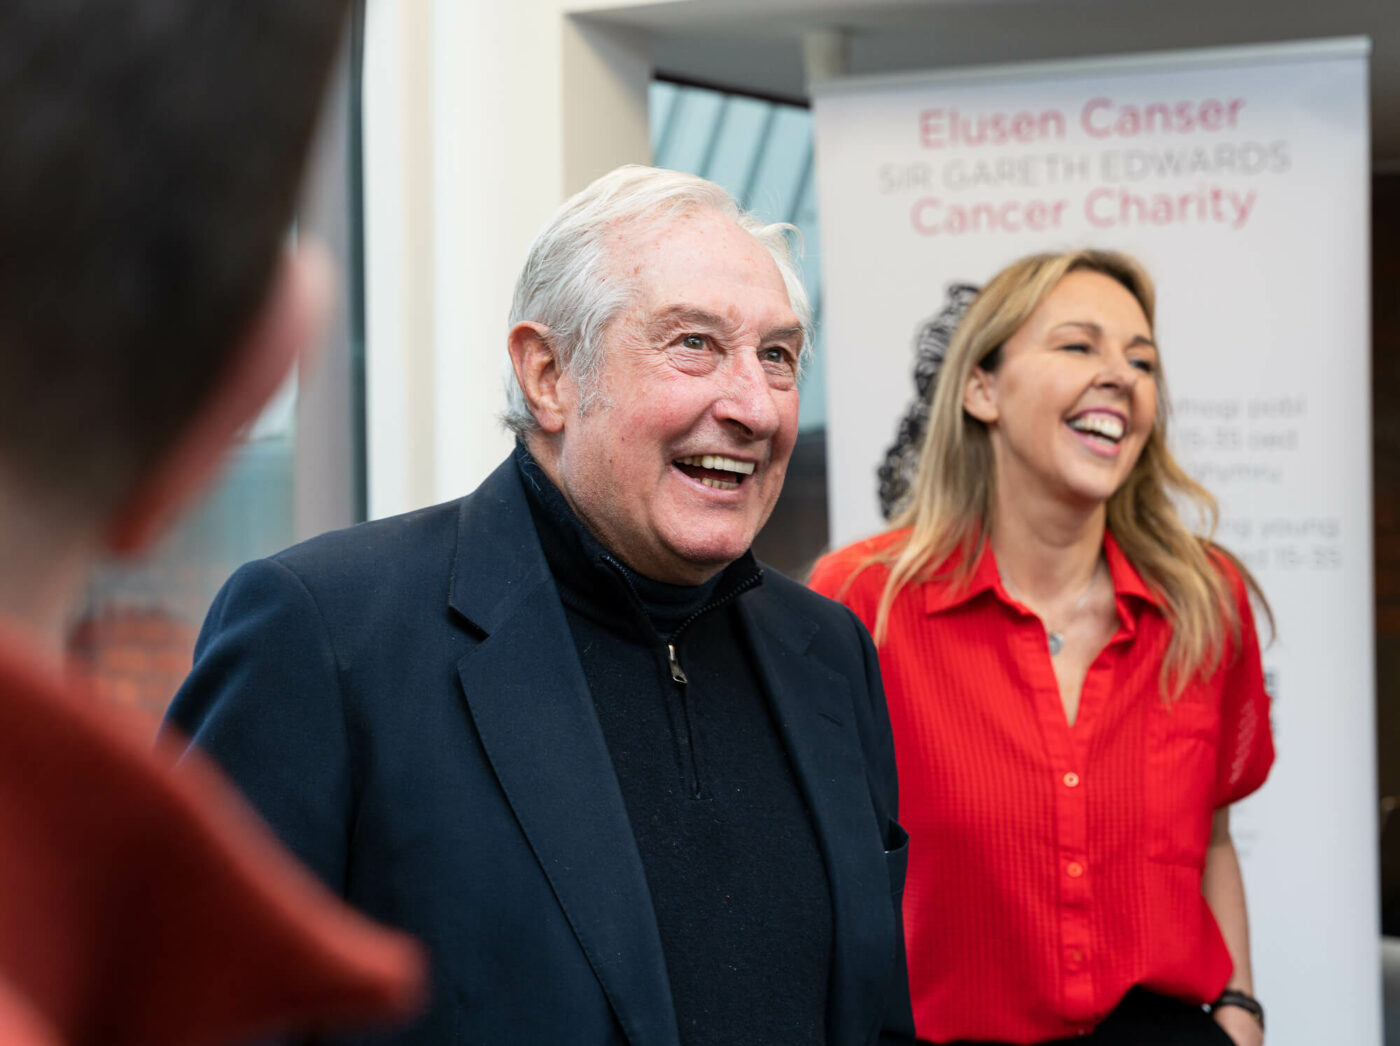 Sir Gareth Edwards along with members from Space2B, blue self storage and Techsol launching their partnership for supporting the Sir Gareth Edwards Cancer Charity